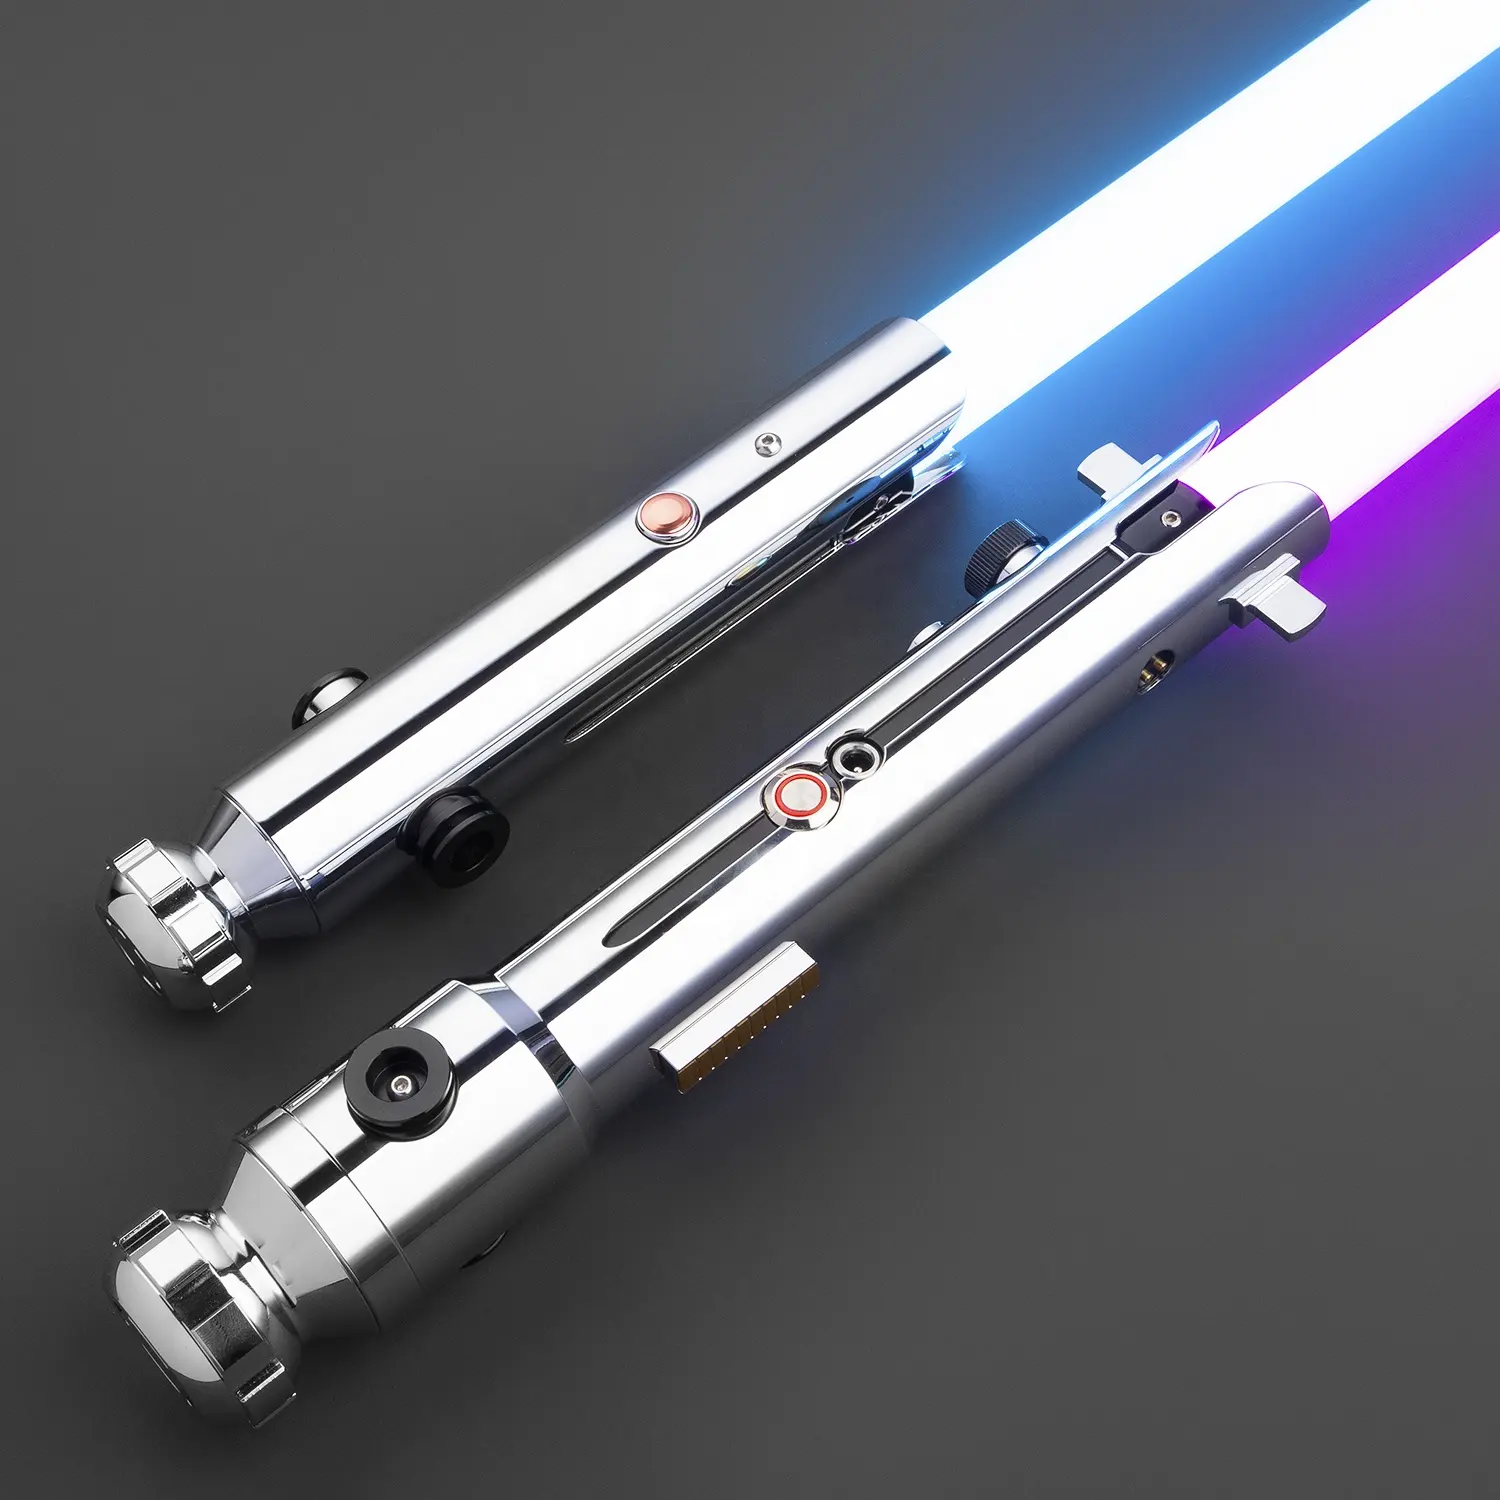 LGT Saberstudio Ahsoka Tano lightsaber heavy dueling RGB LED changing smooth swing laser sword for star the wars movie tool